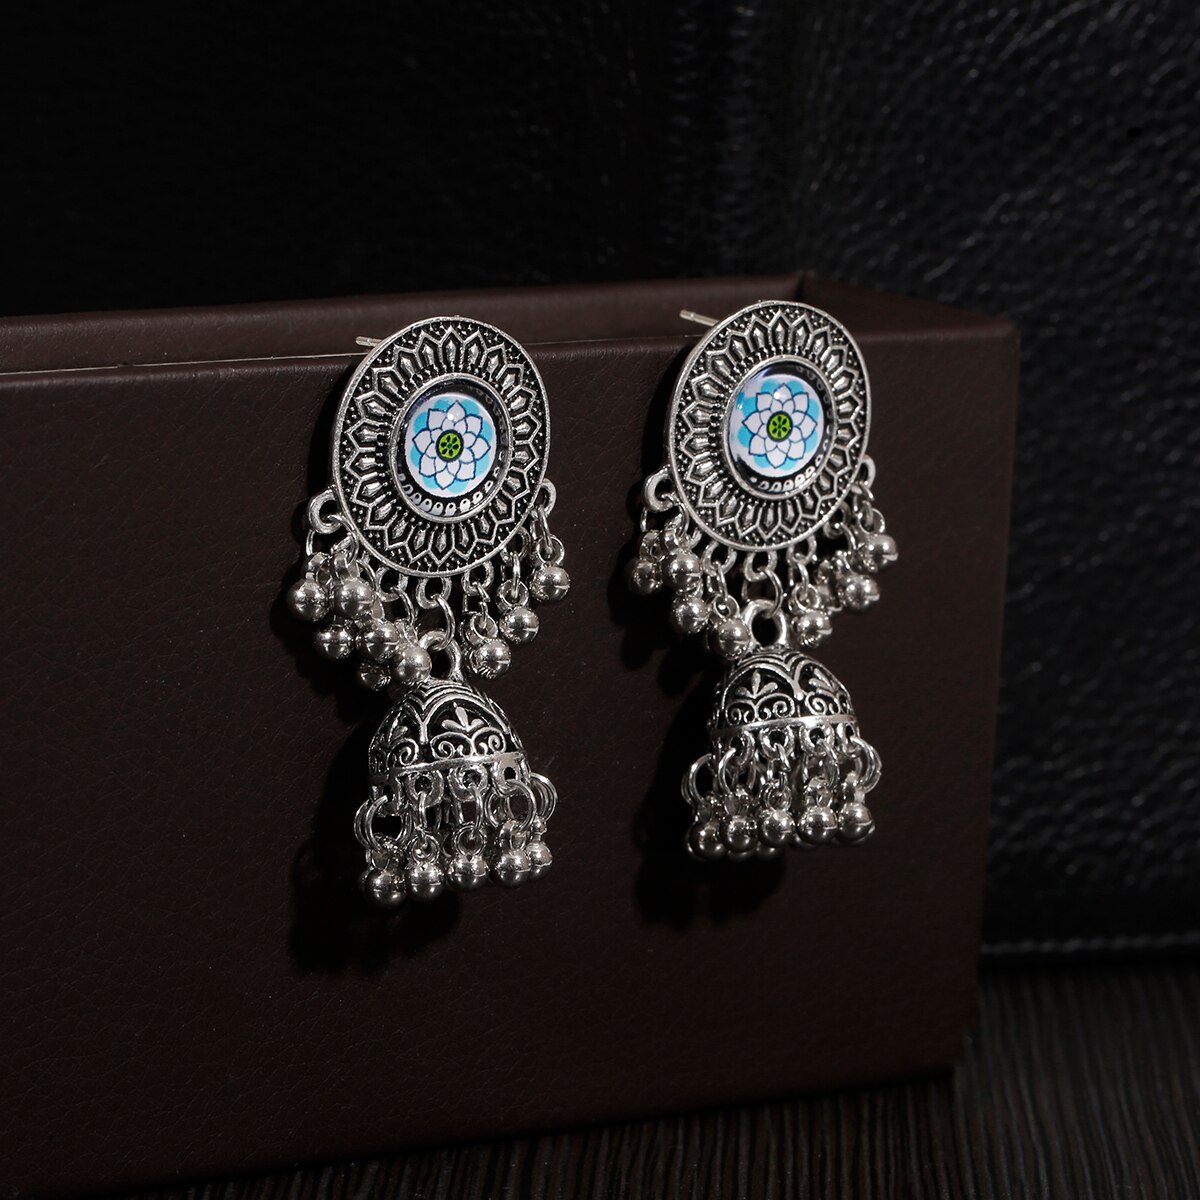 Classic-Vintage-Silver-Color-Alloy-Carved-Bollywood-Oxidized-Earrings-For-Women-Ethnic-Rose-Red-Jhum-1005003651700580-4